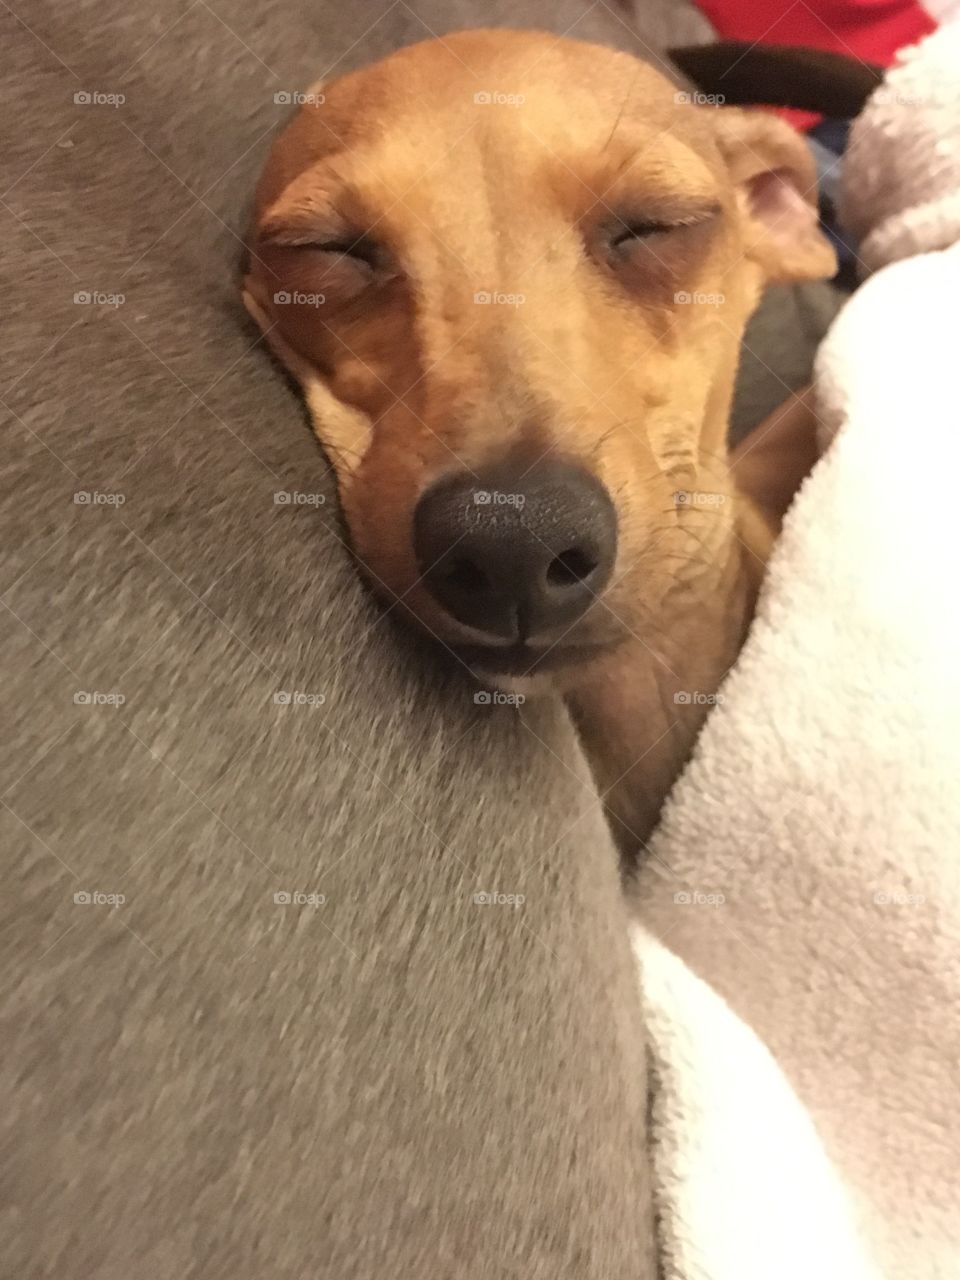 Amber the Italian greyhound puppy smiling while asleep snuggled up to Libby the whippet